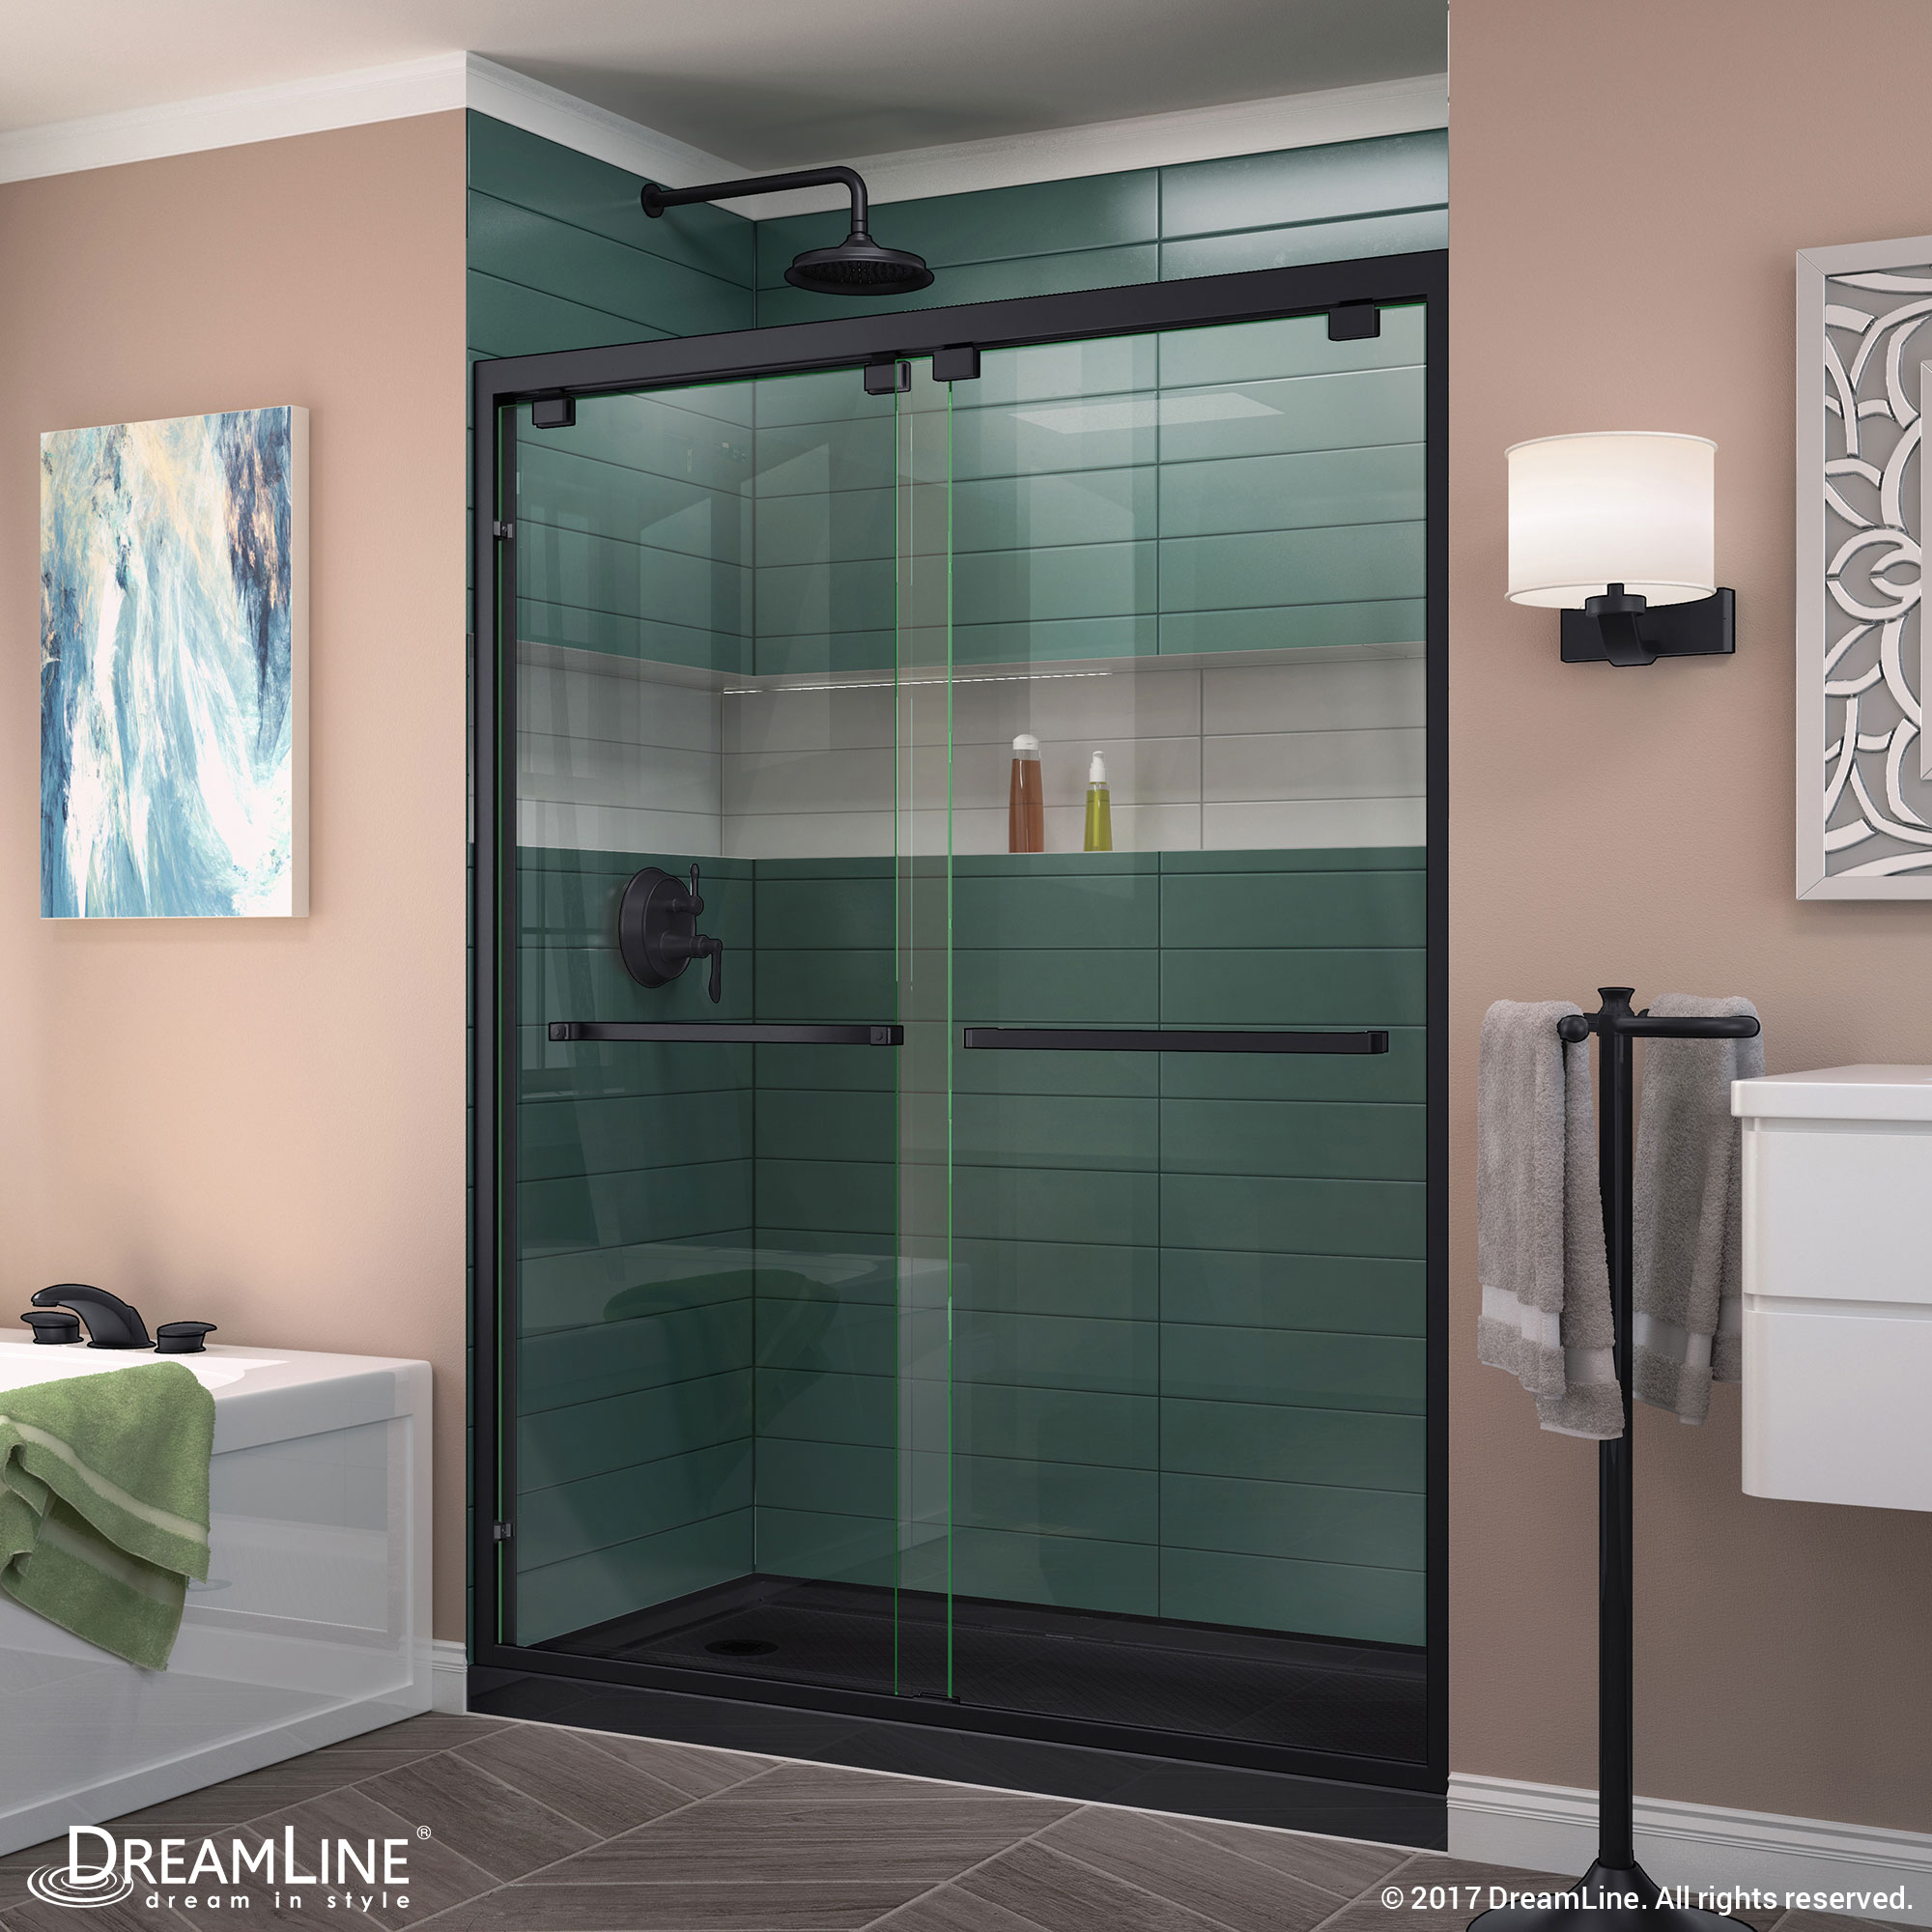 DreamLine Encore 32 in. D x 60 in. W x 78 3/4 in. H Bypass Shower Door in Chrome and Left Drain Black Base Kit